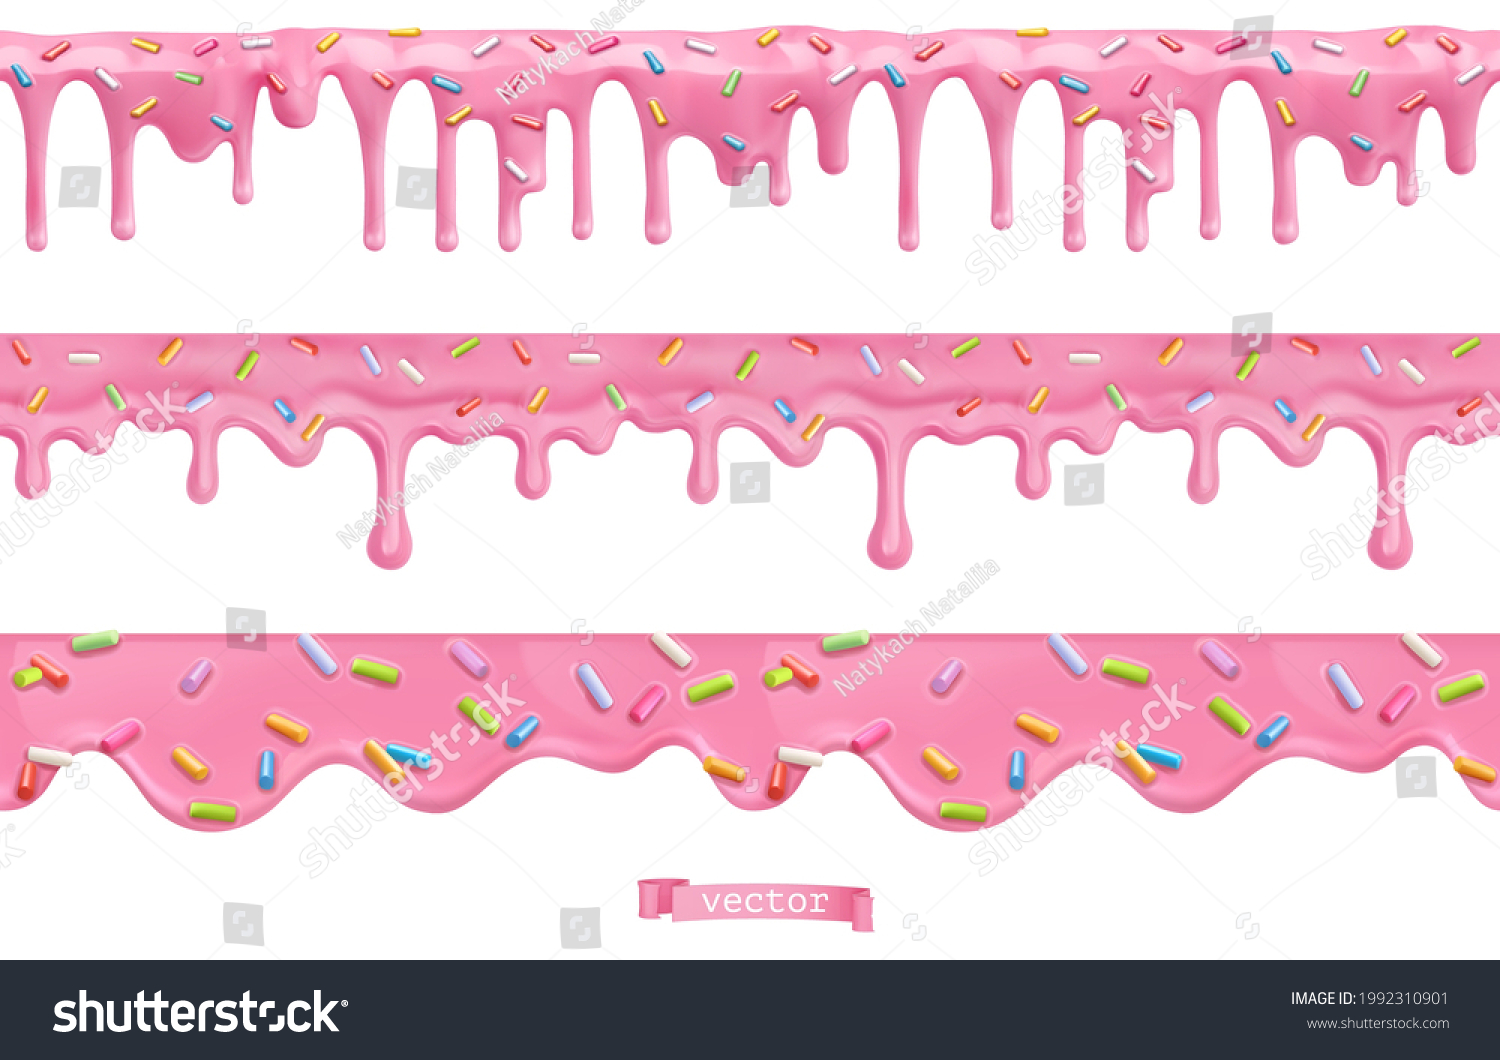 Donut Pink Icing Sprinkles 3d Vector Stock Vector Royalty Free 1992310901 Shutterstock 4683